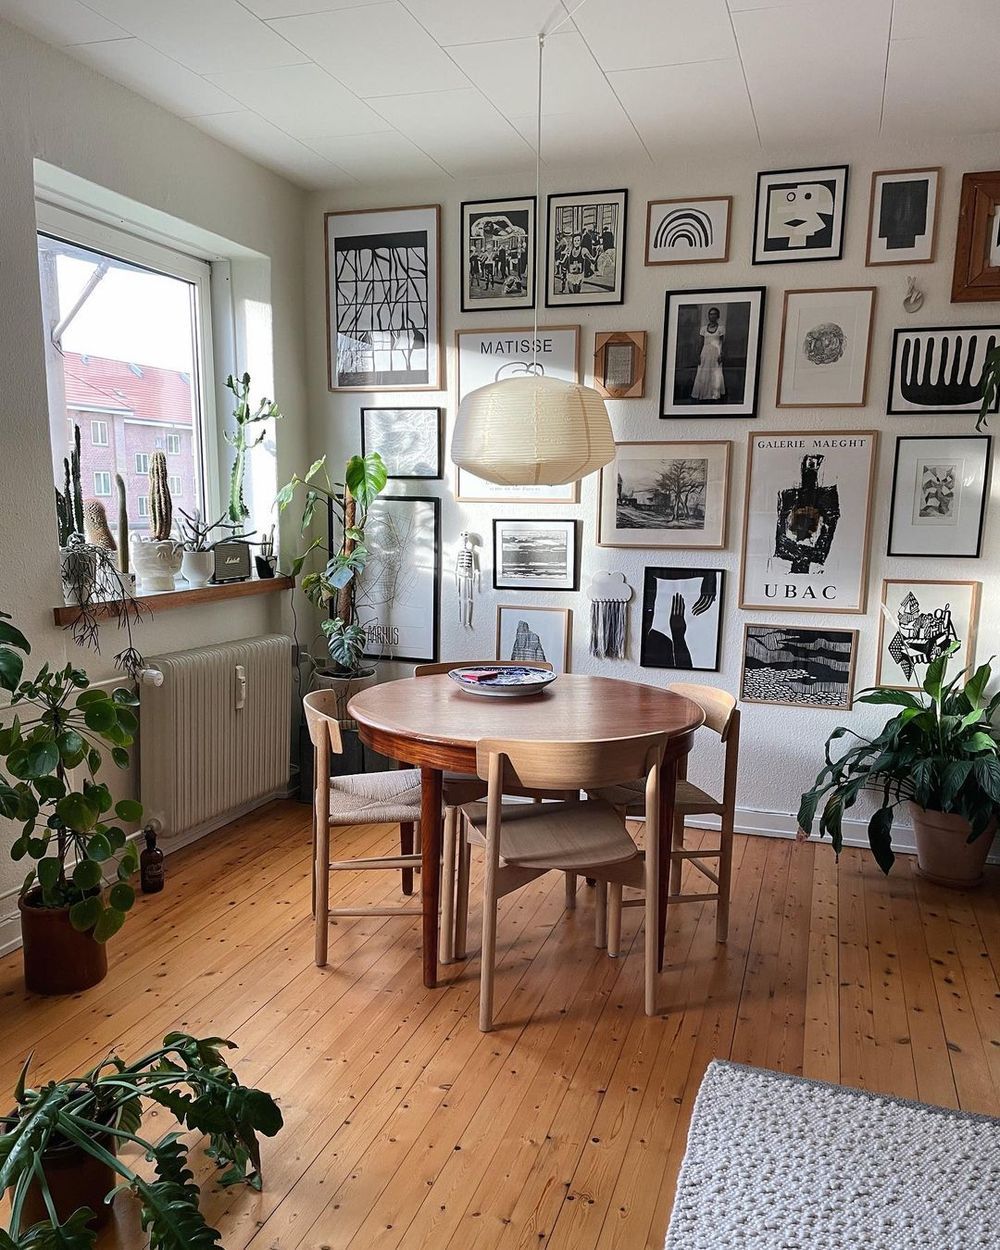 Gallery wall black and white danish dining room via @thildesecher